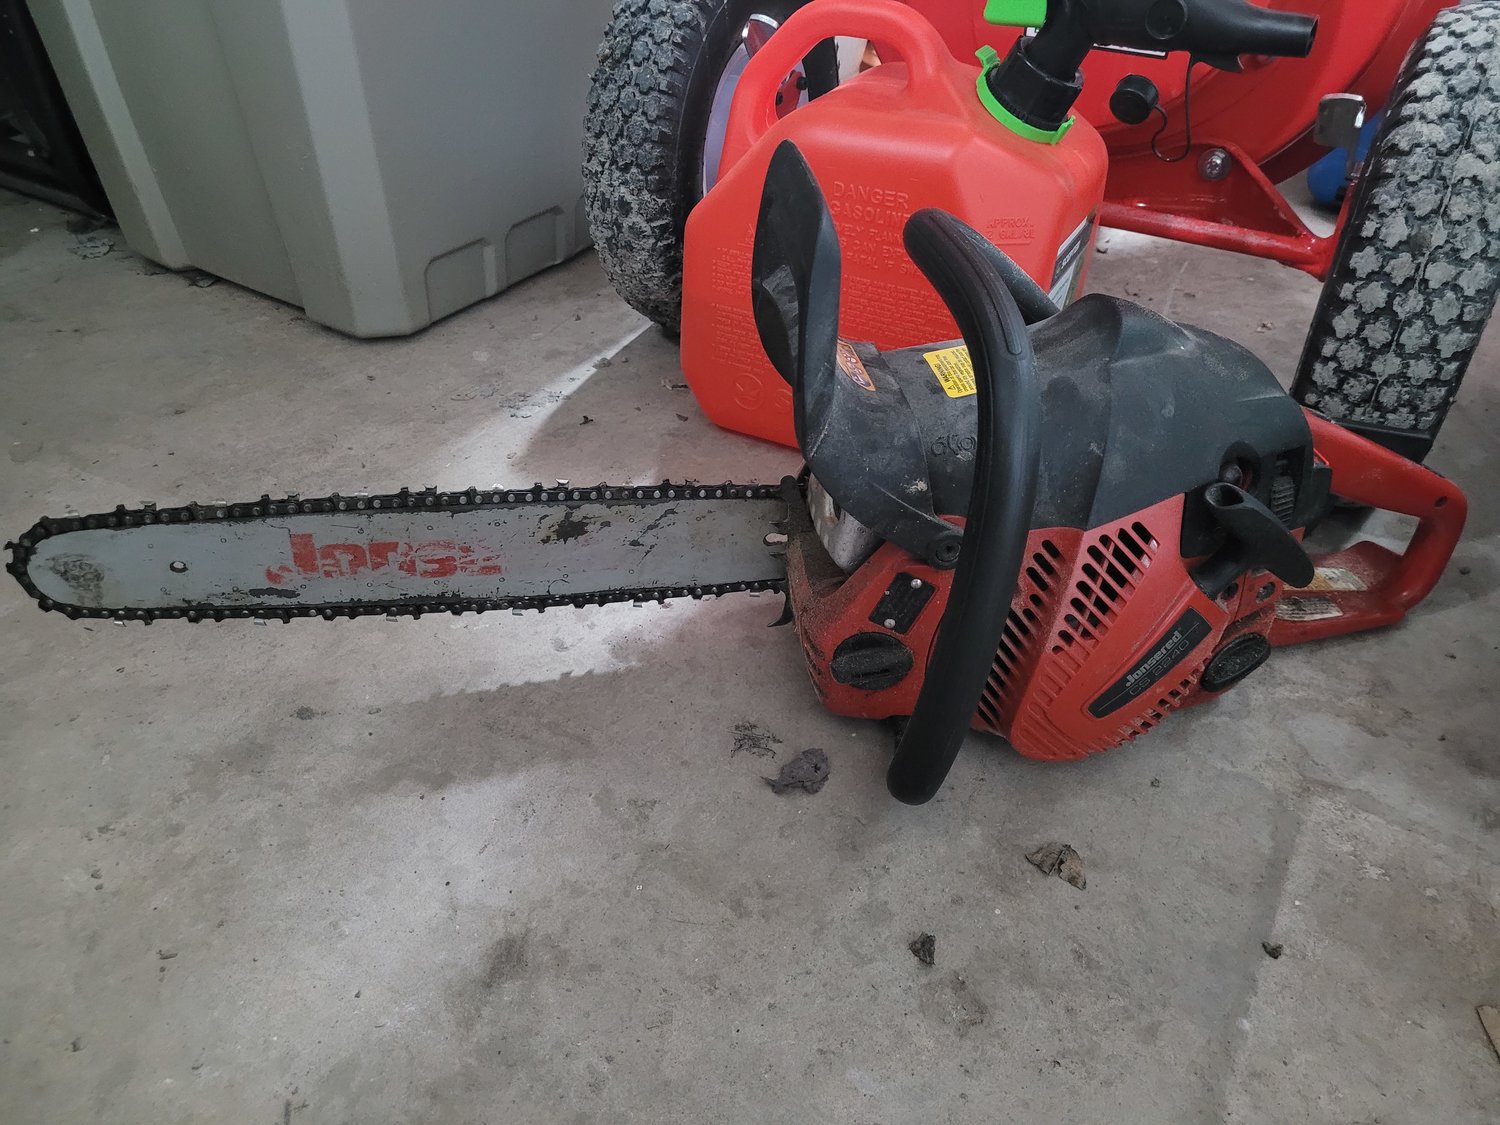 My newly resurrected chainsaw, now aptly dubbed the Angry Beaver.